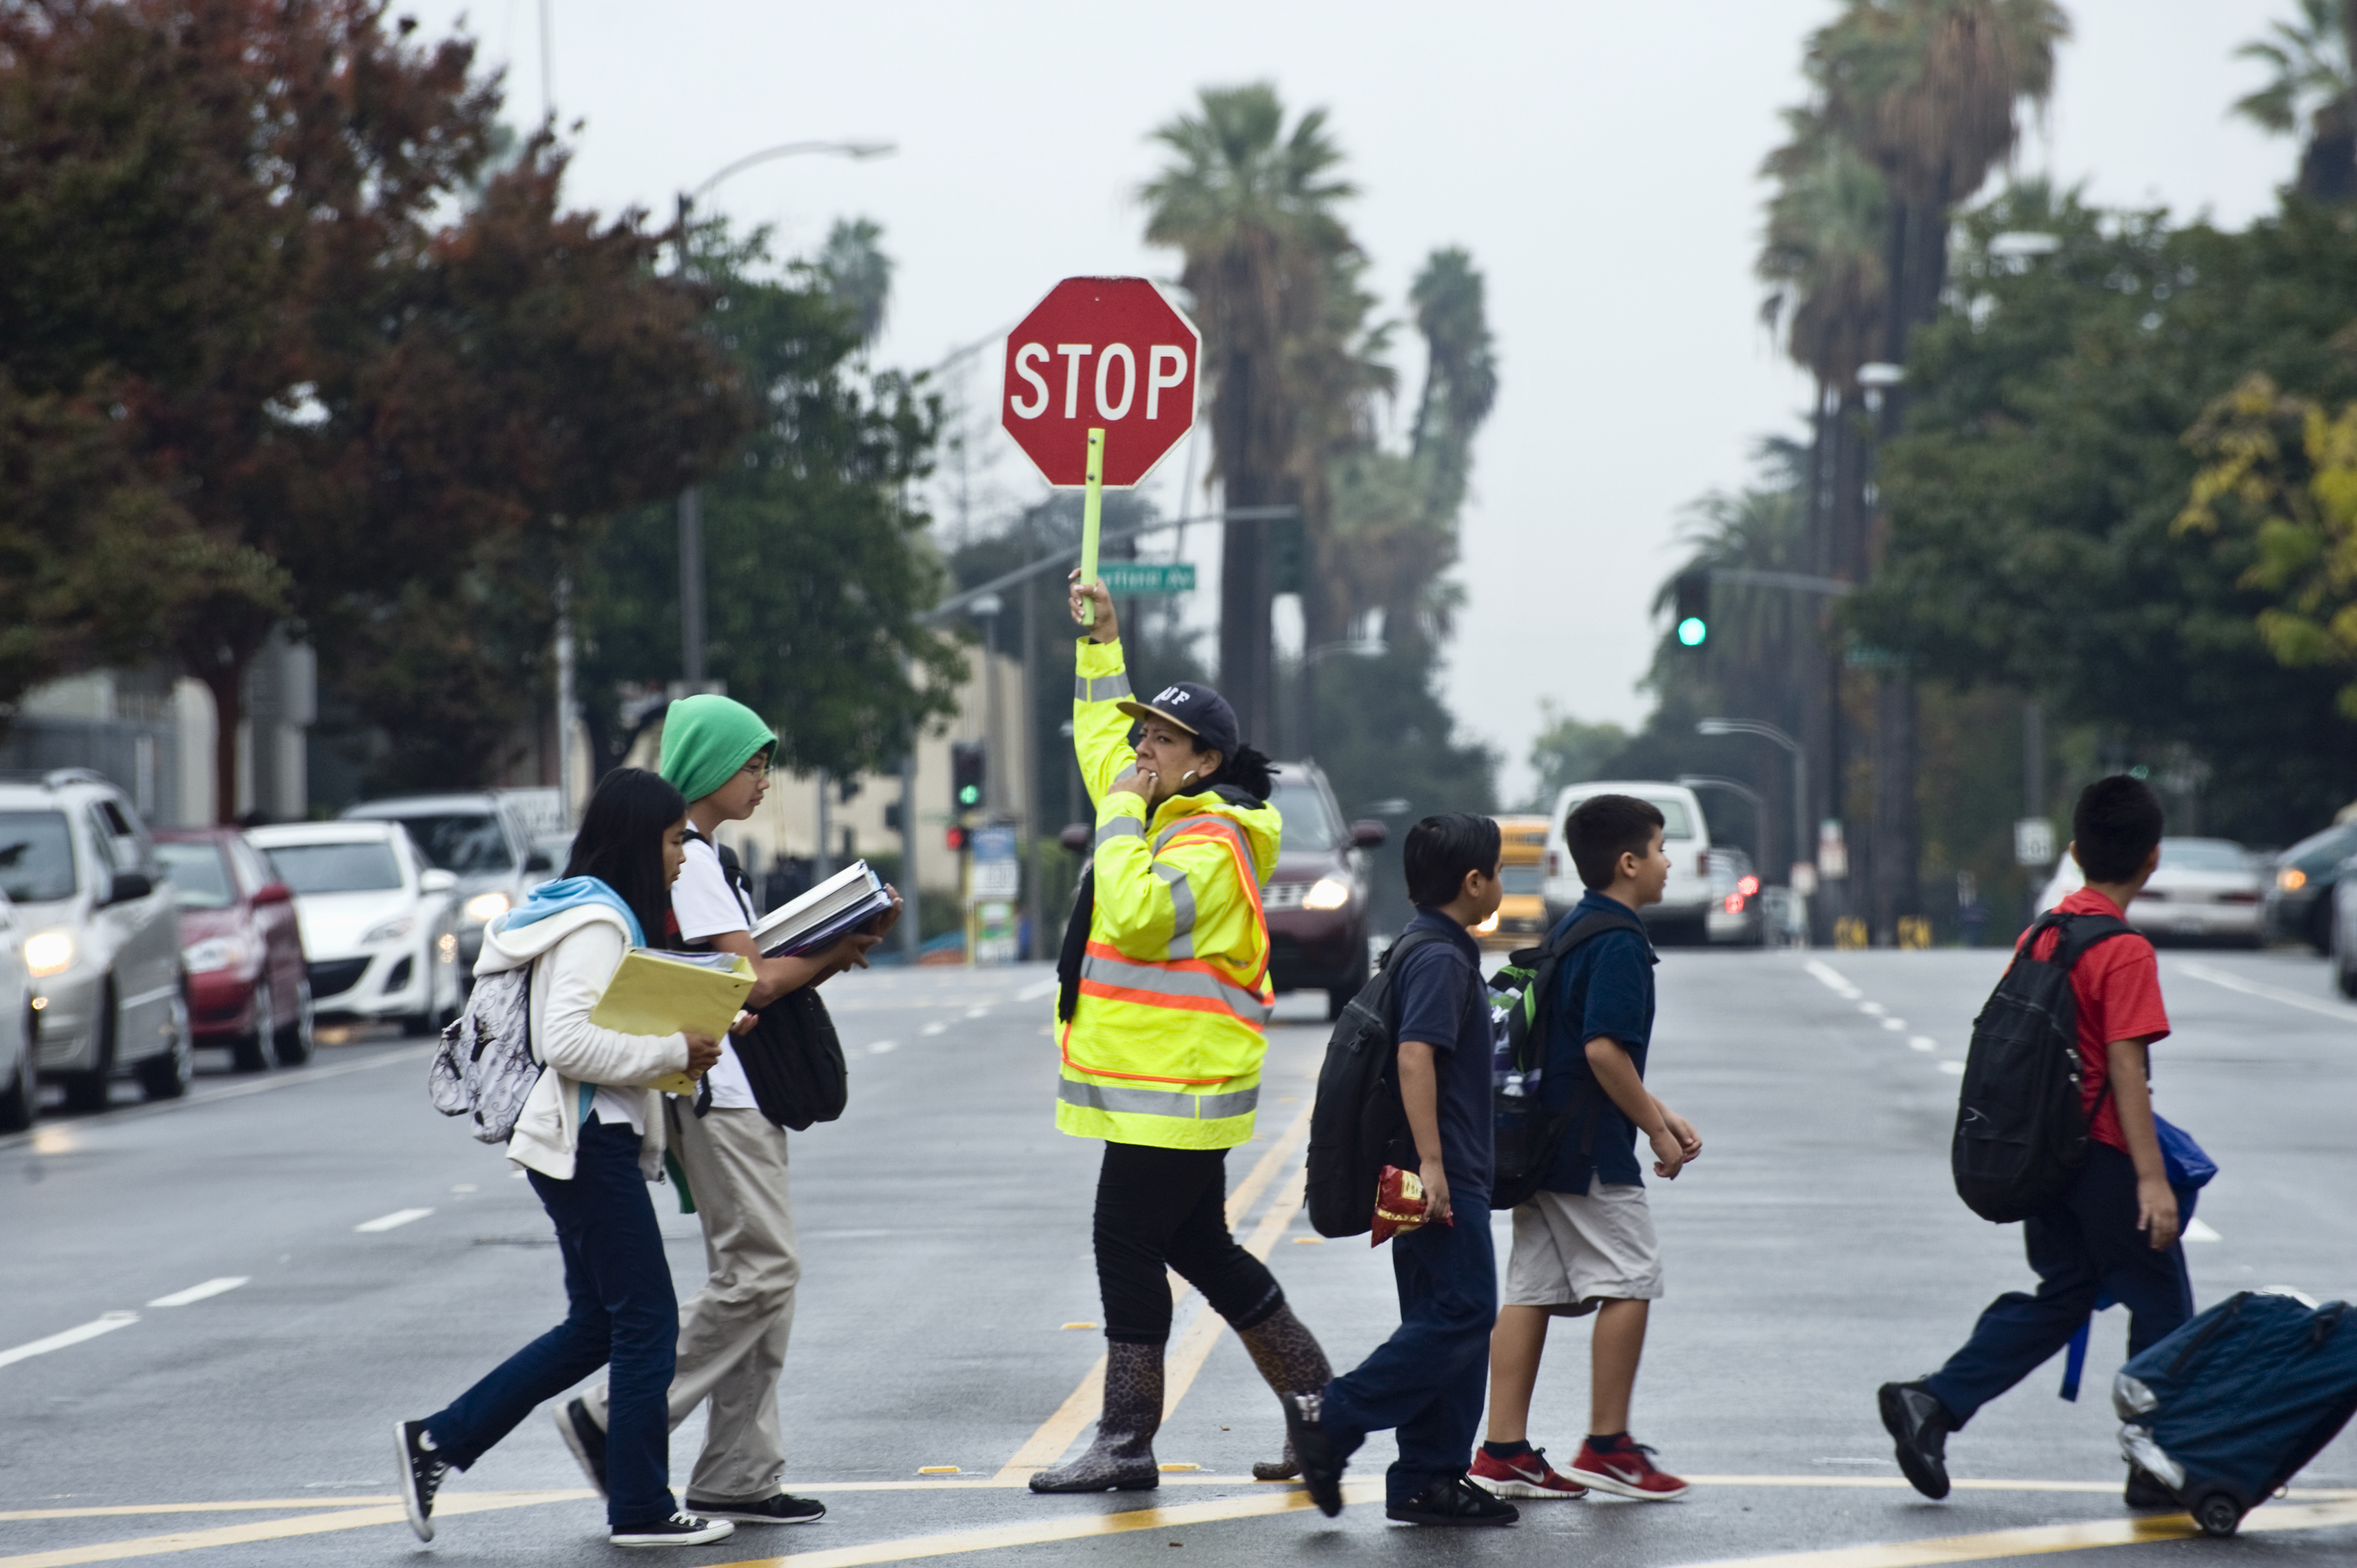 children crossing at crosswalk with guard holding stop sign